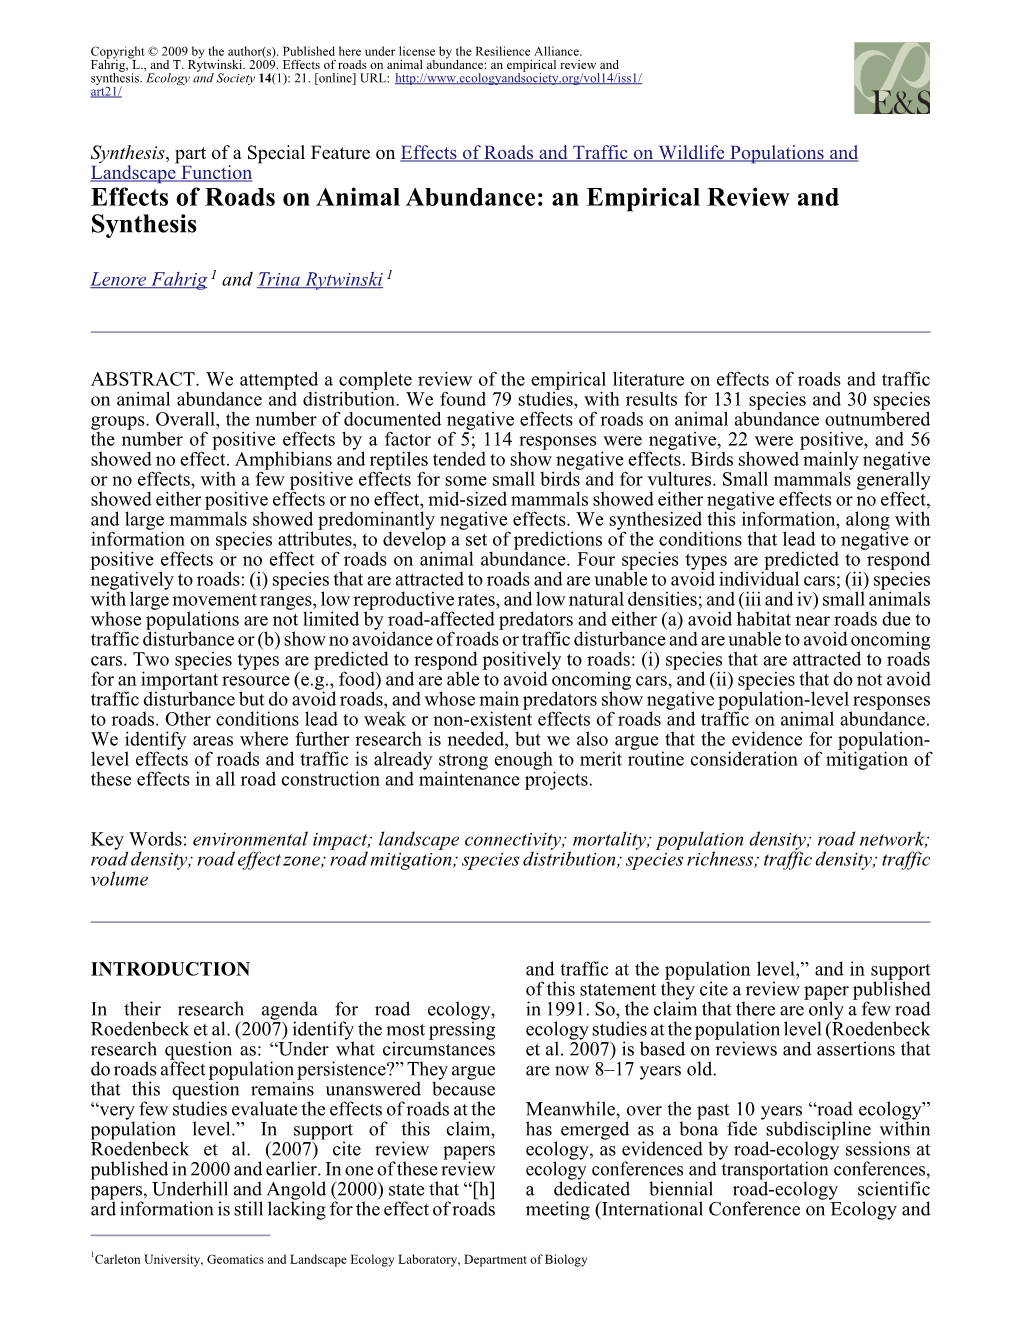 Effects of Roads on Animal Abundance: an Empirical Review and Synthesis